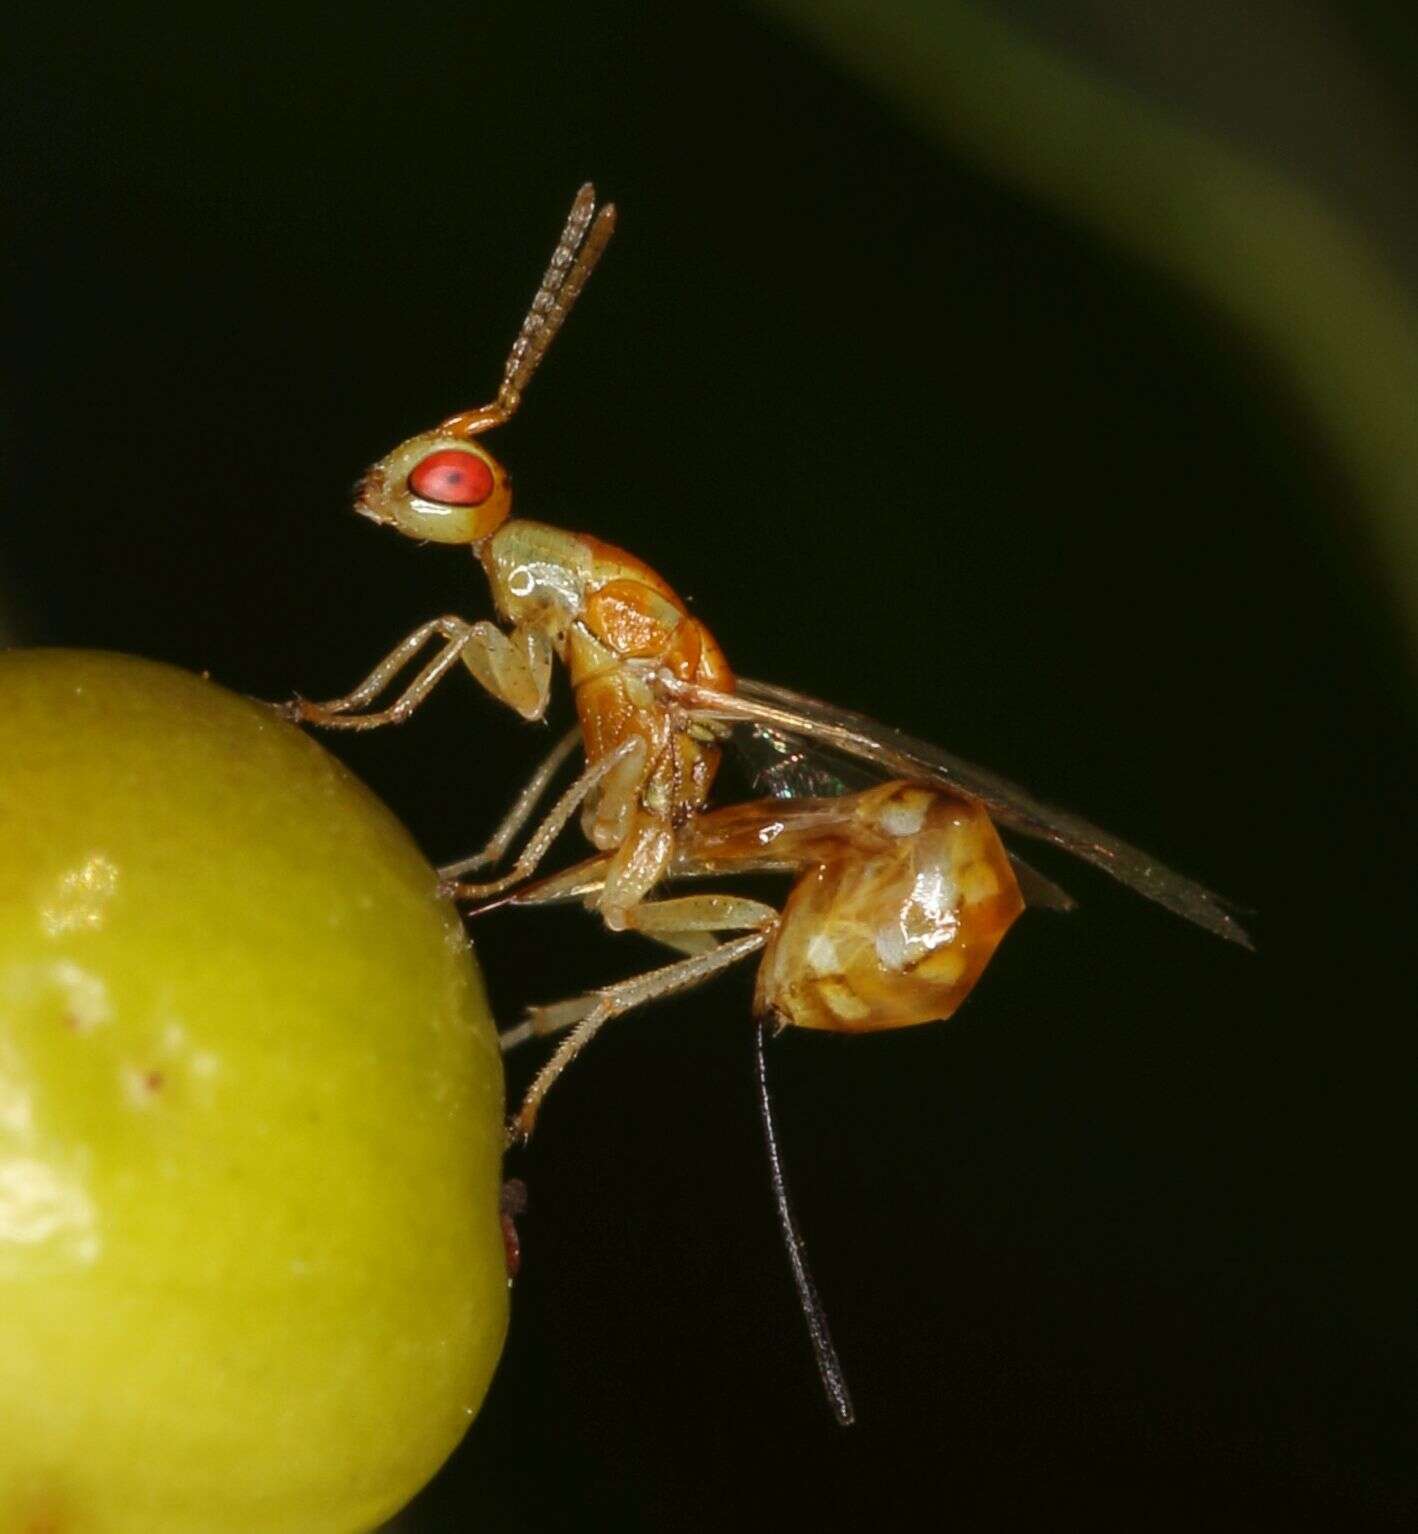 Image of Seed chalcid wasp